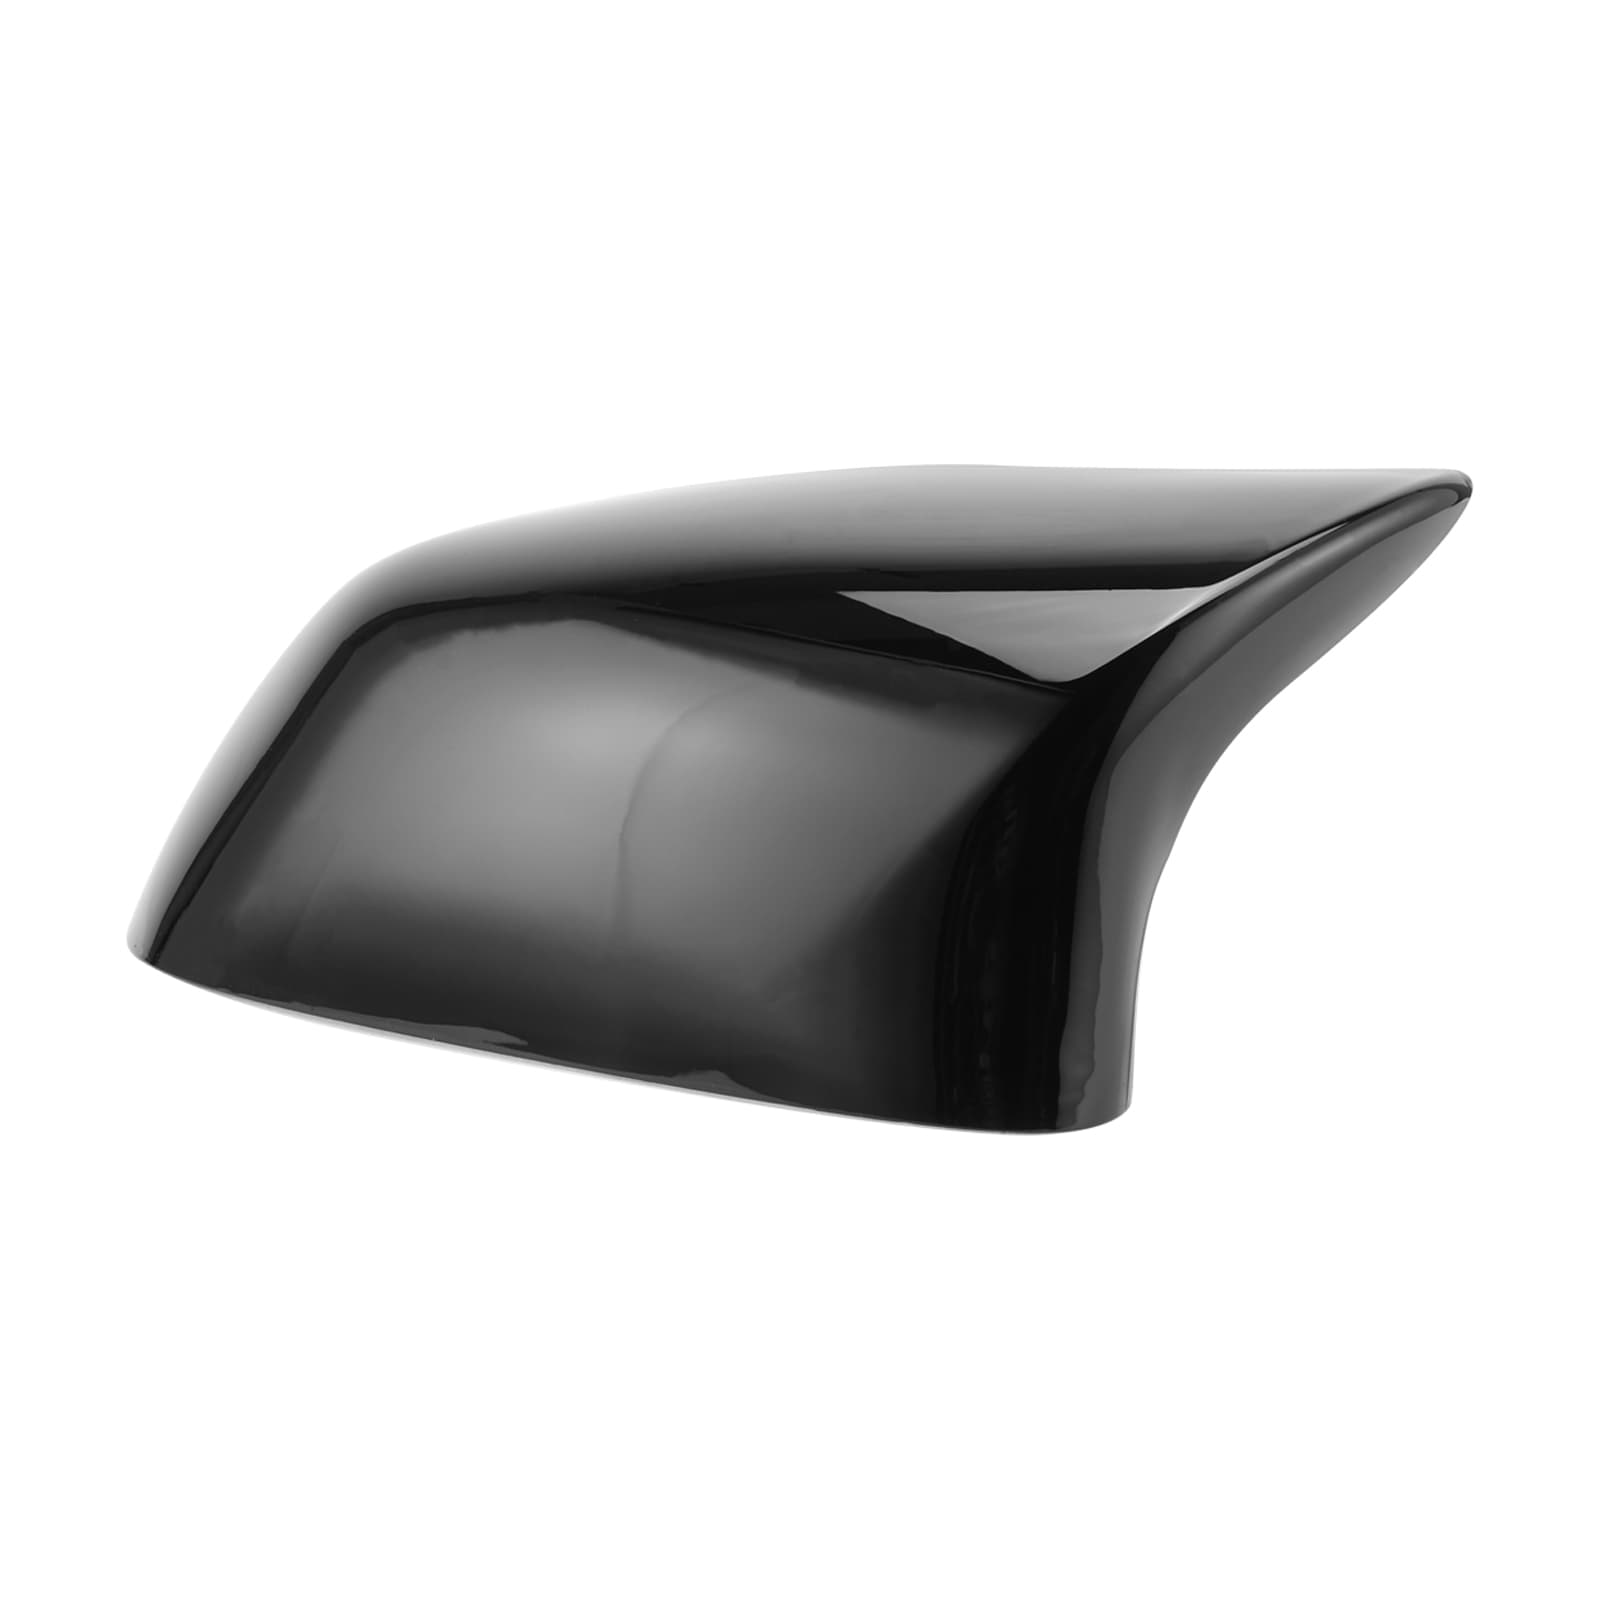 For BMW F15 X5 F25 X3 F16 X6 F26 X4 M-Style Gloss Black Replacement Mirror Covers 14-18